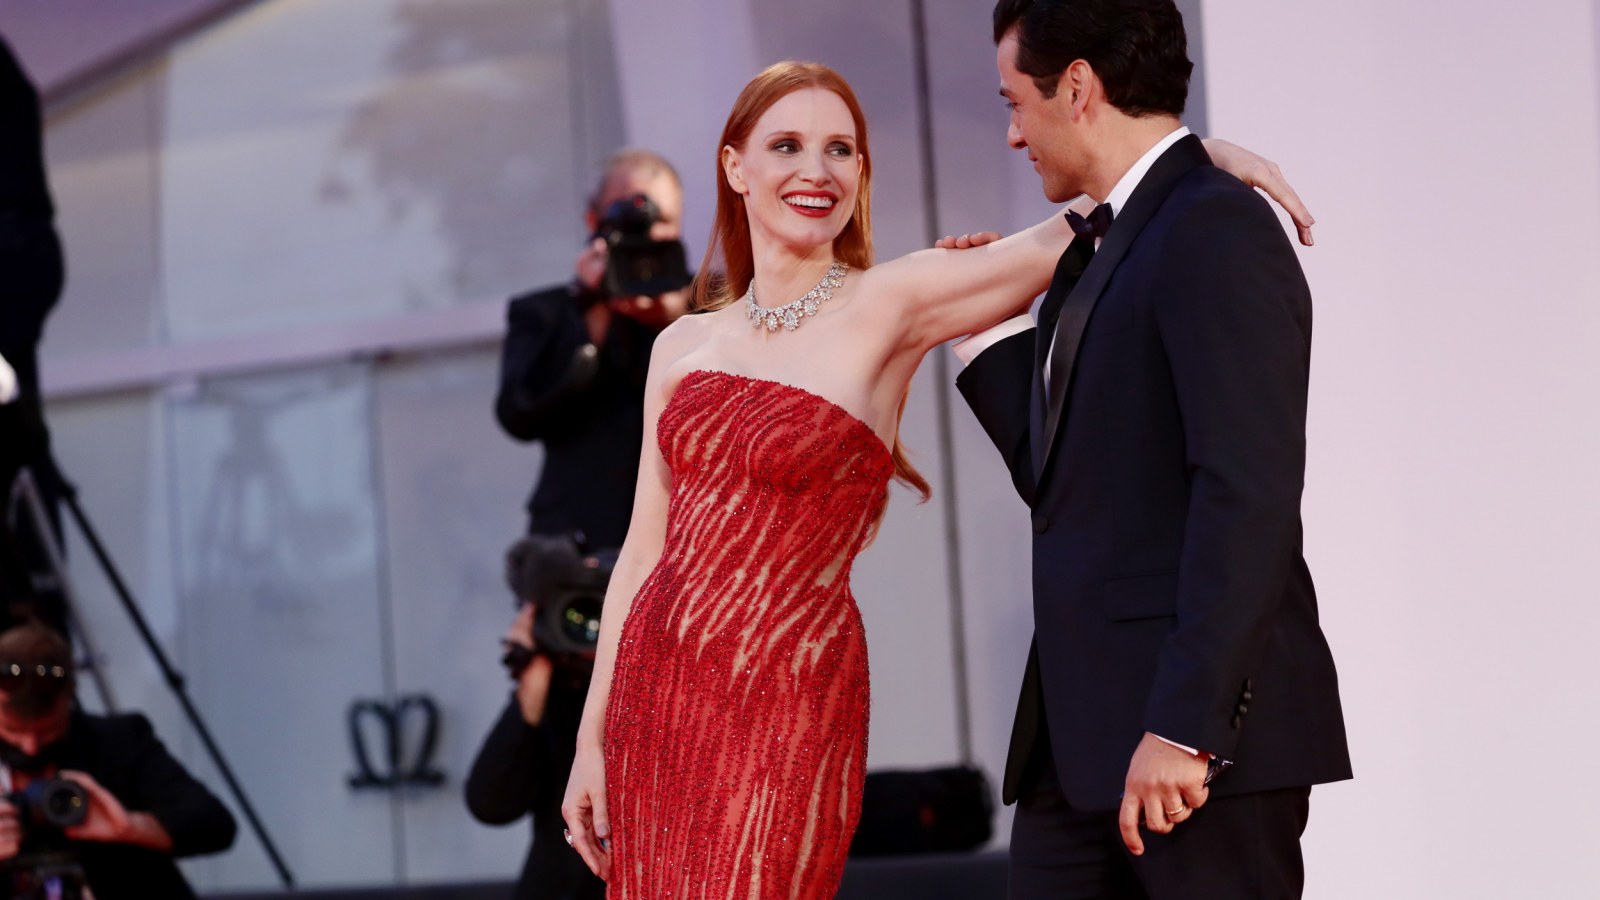 Chastain dating jessica Who Is